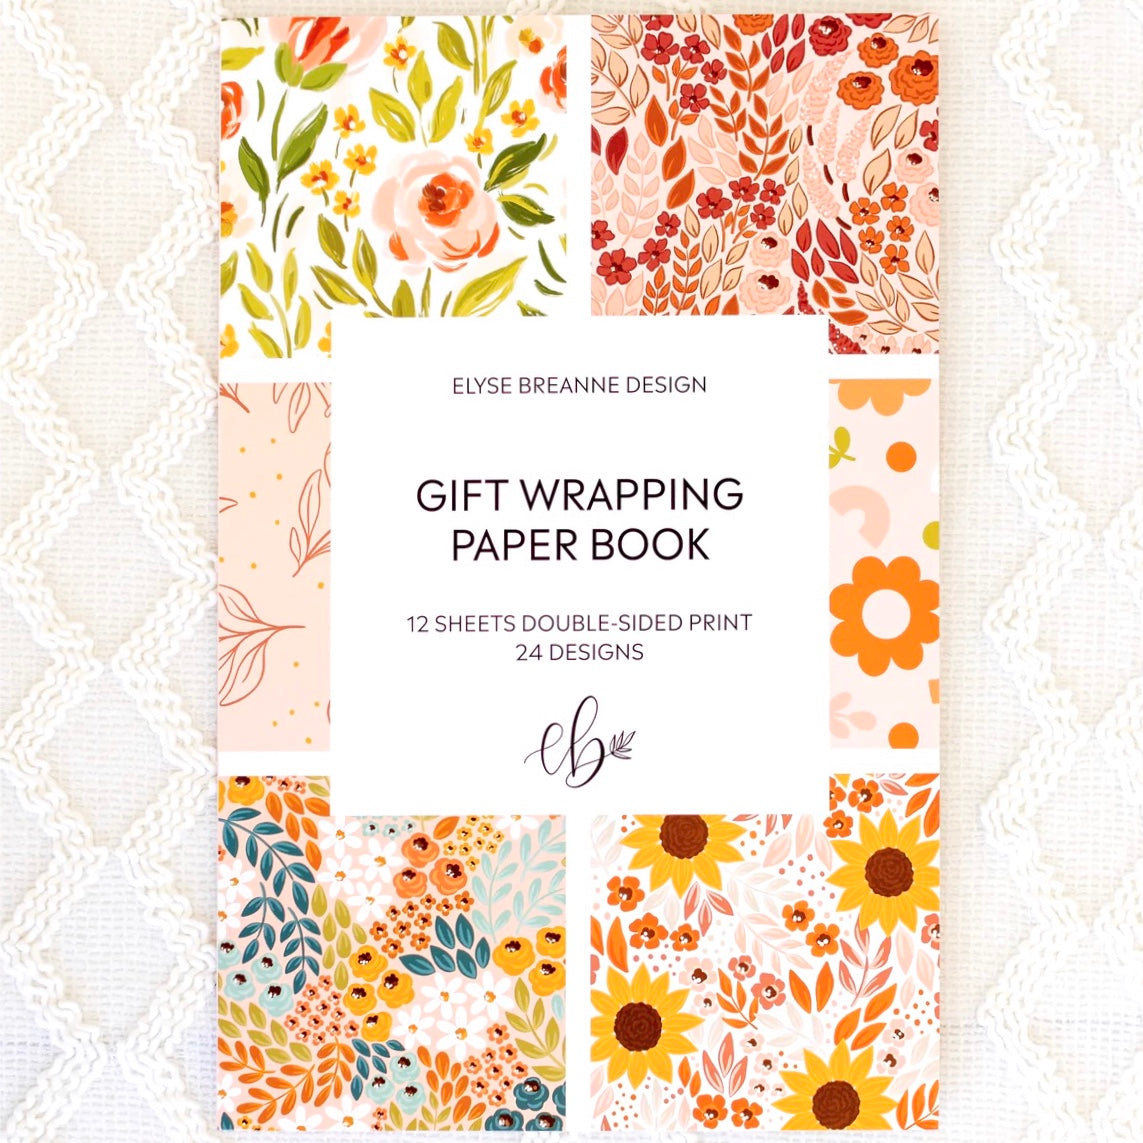 Wrapping Paper Book – Elyse Breanne Design